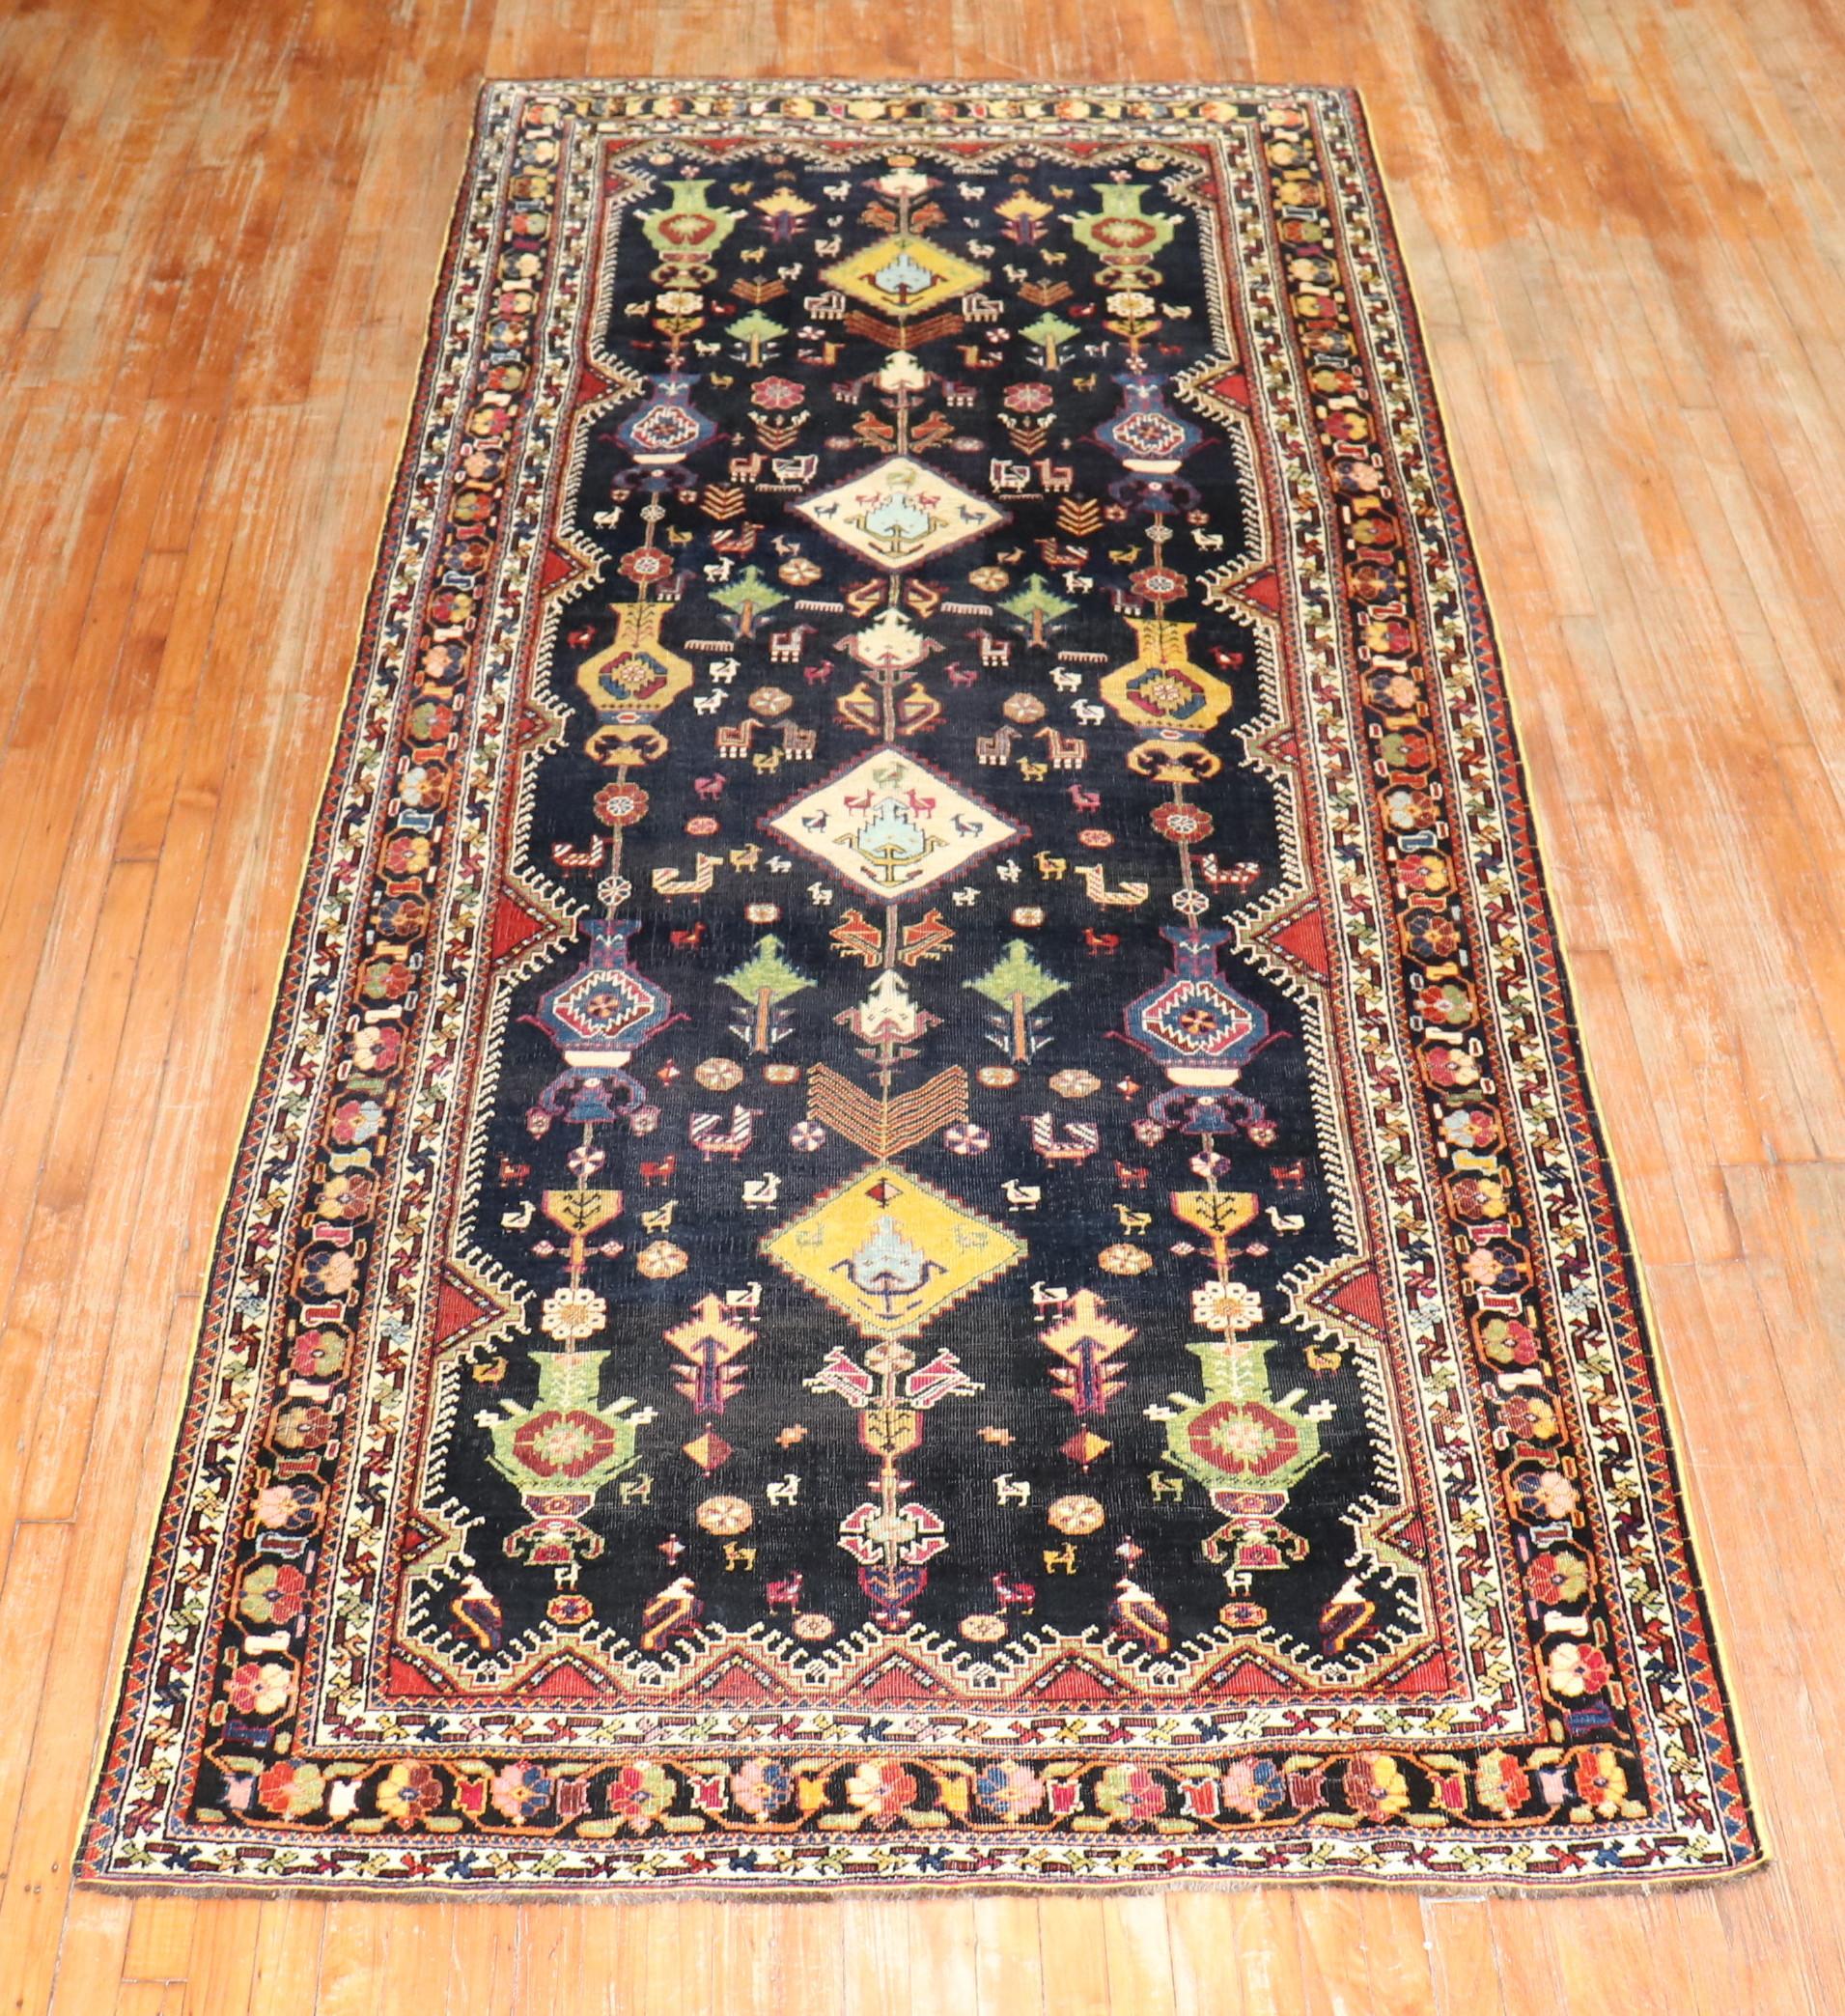 An early 20th century Persian Shiraz Gallery size rug

Measures: 4'11'' x 11'8''.